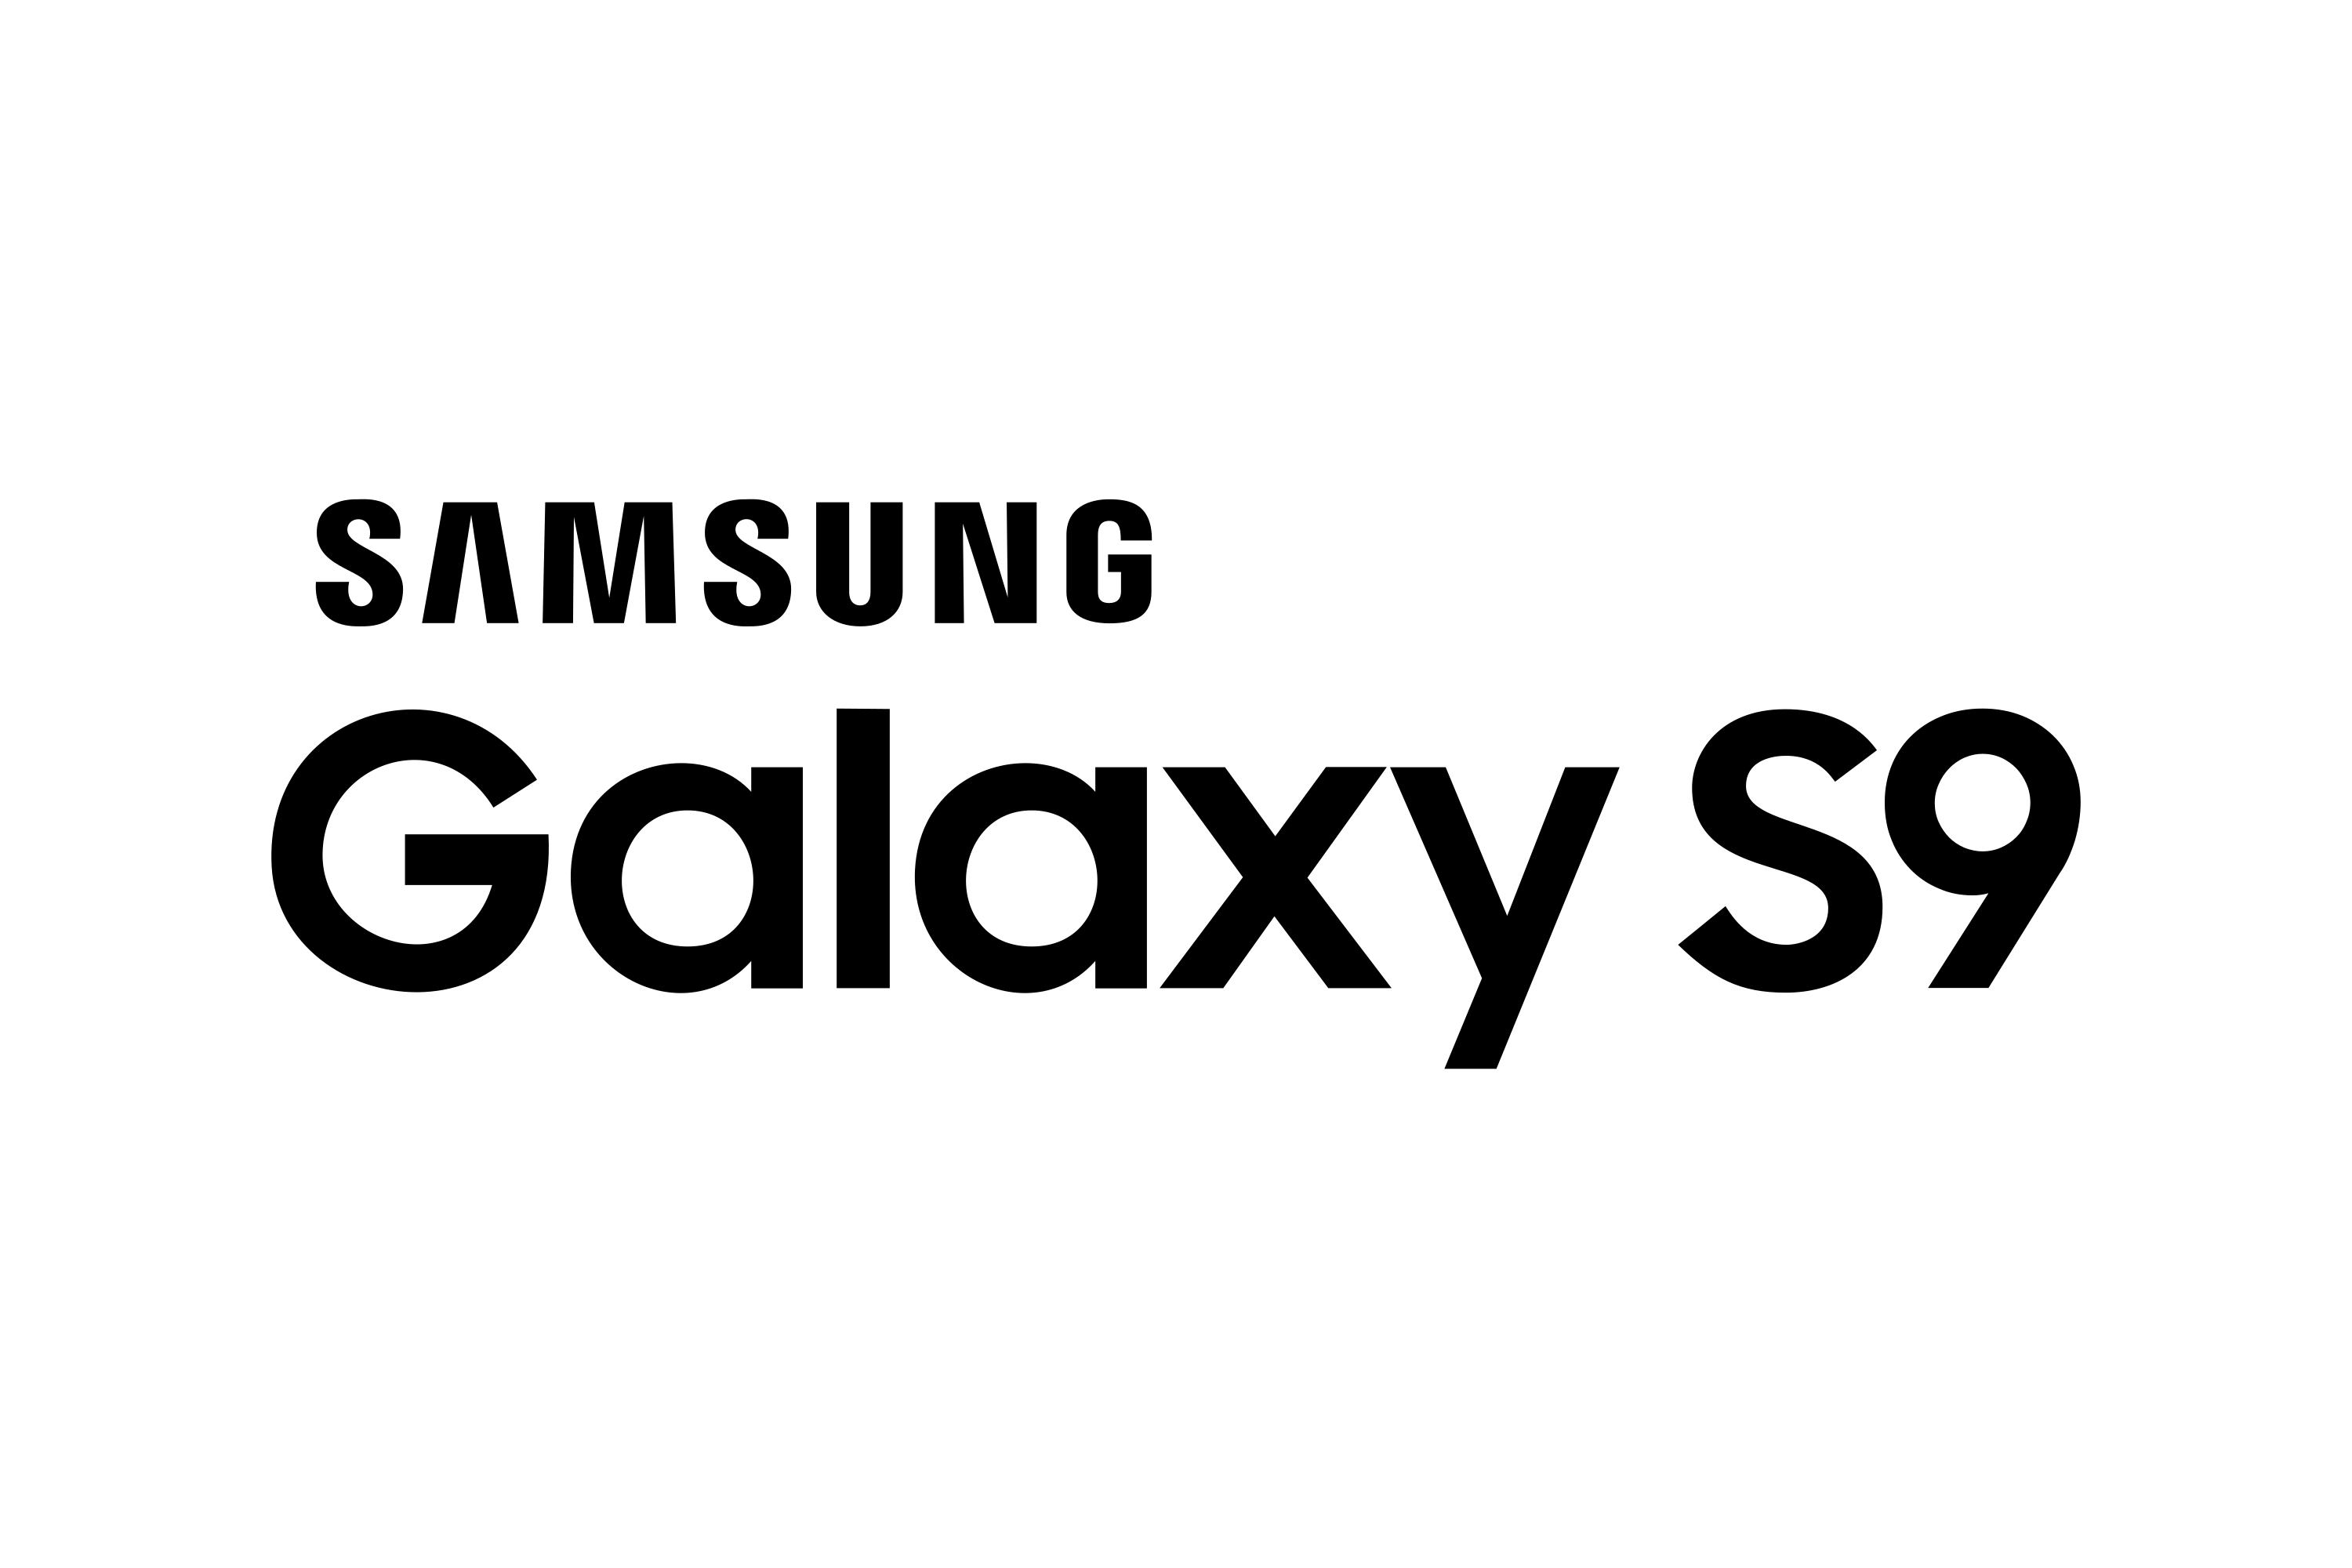 Download Samsung Galaxy S9 Logo in SVG Vector or PNG File Format ...